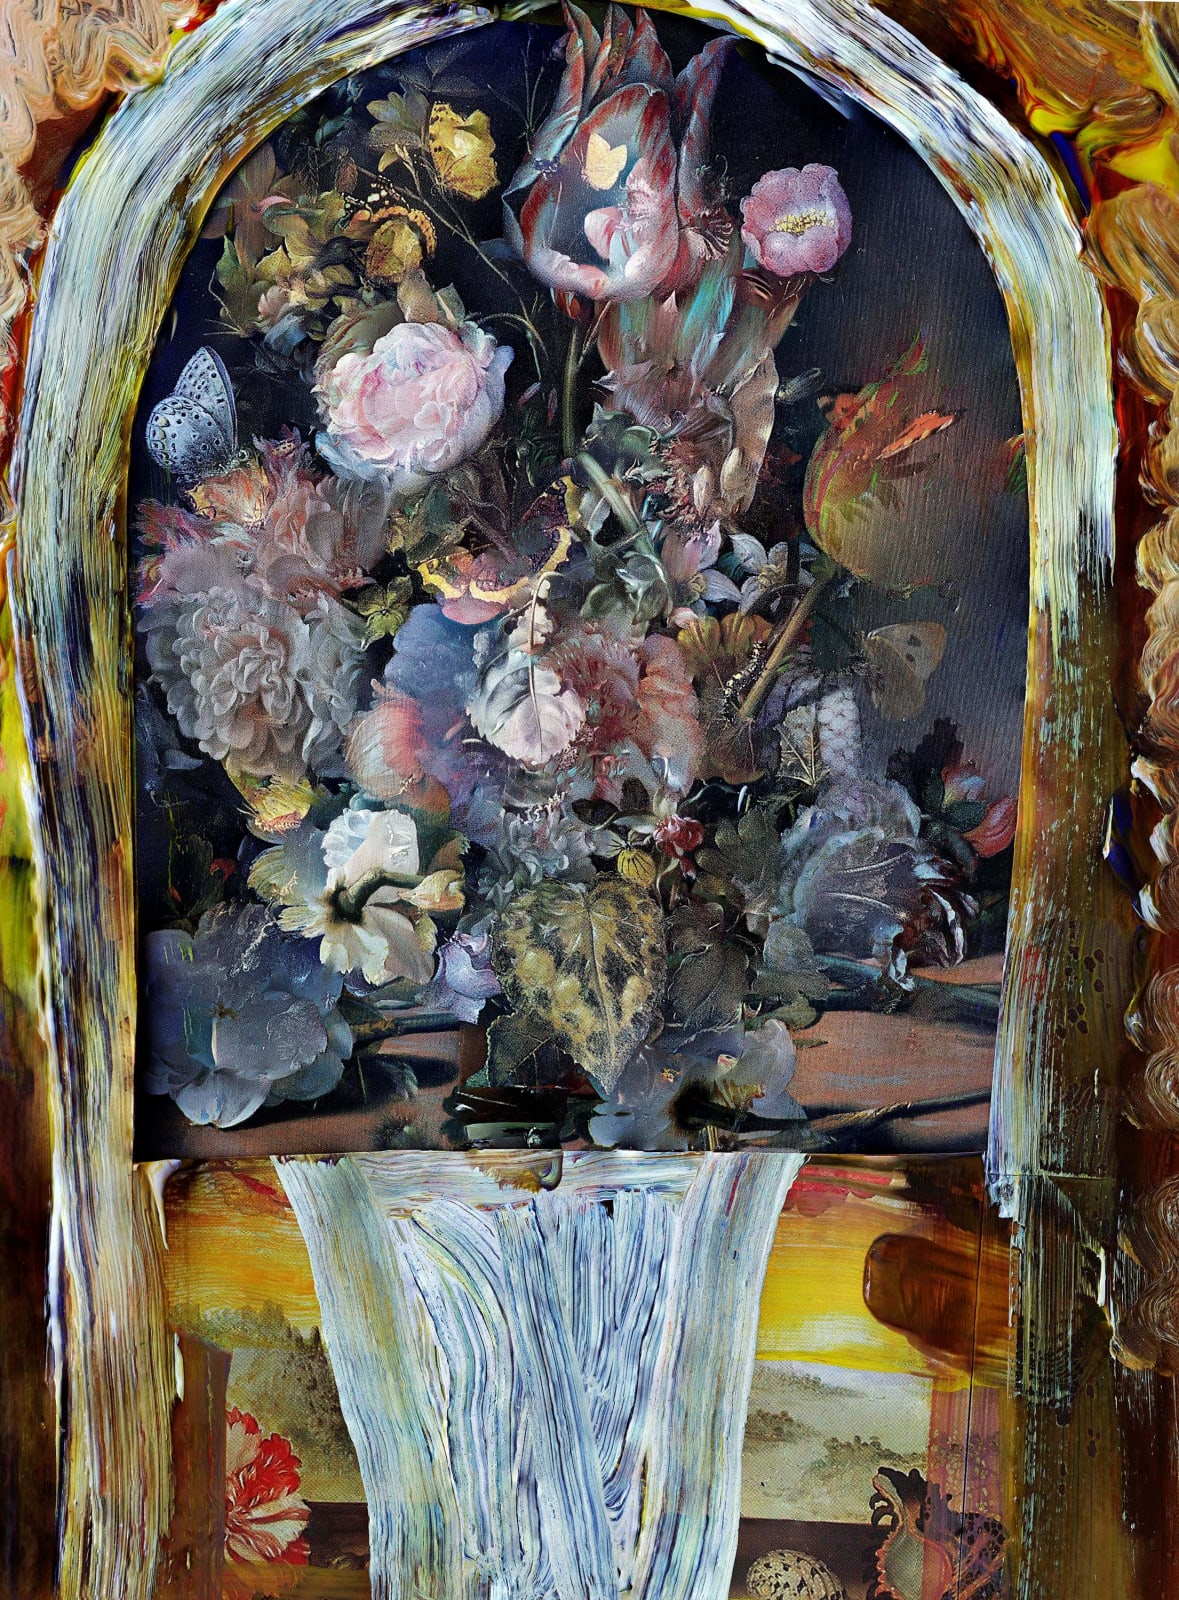 Abelardo Morell Flowers for Lisa #17 multiple exposures of floral illustrations and painting of a vase and corridor